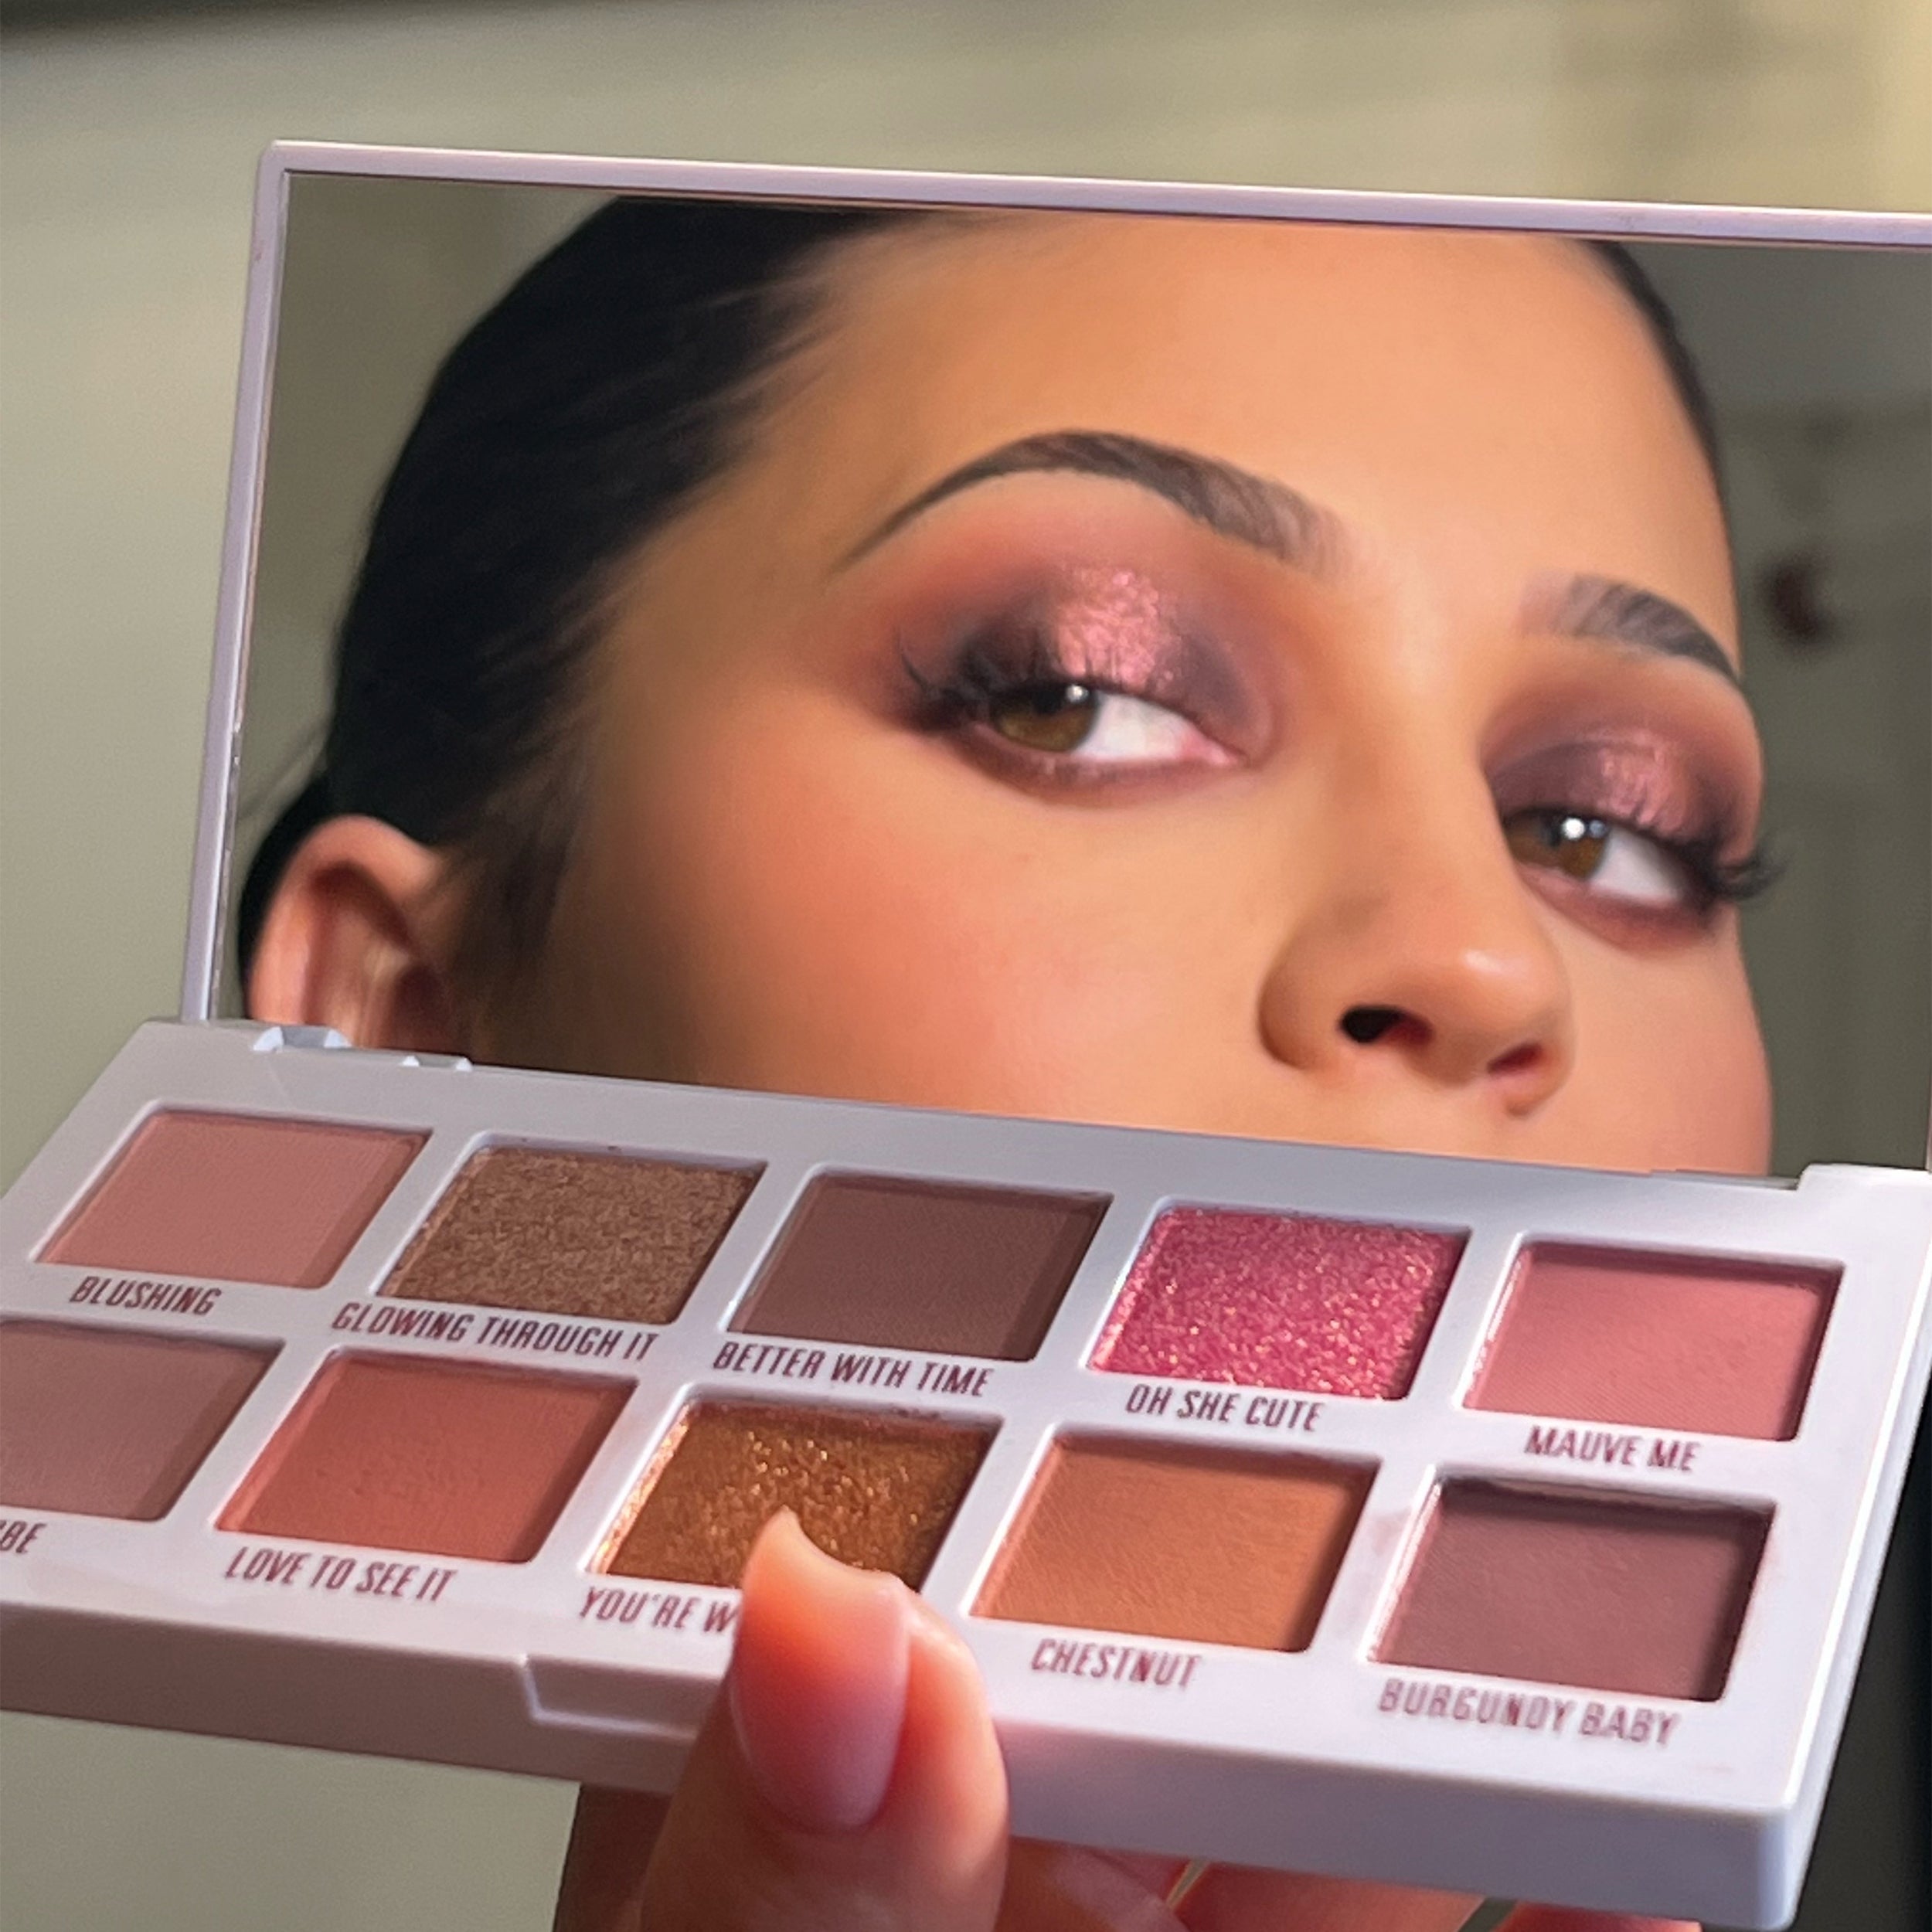 Mauve Pressed Powder Palette | Cosmetics by Kylie Jenner